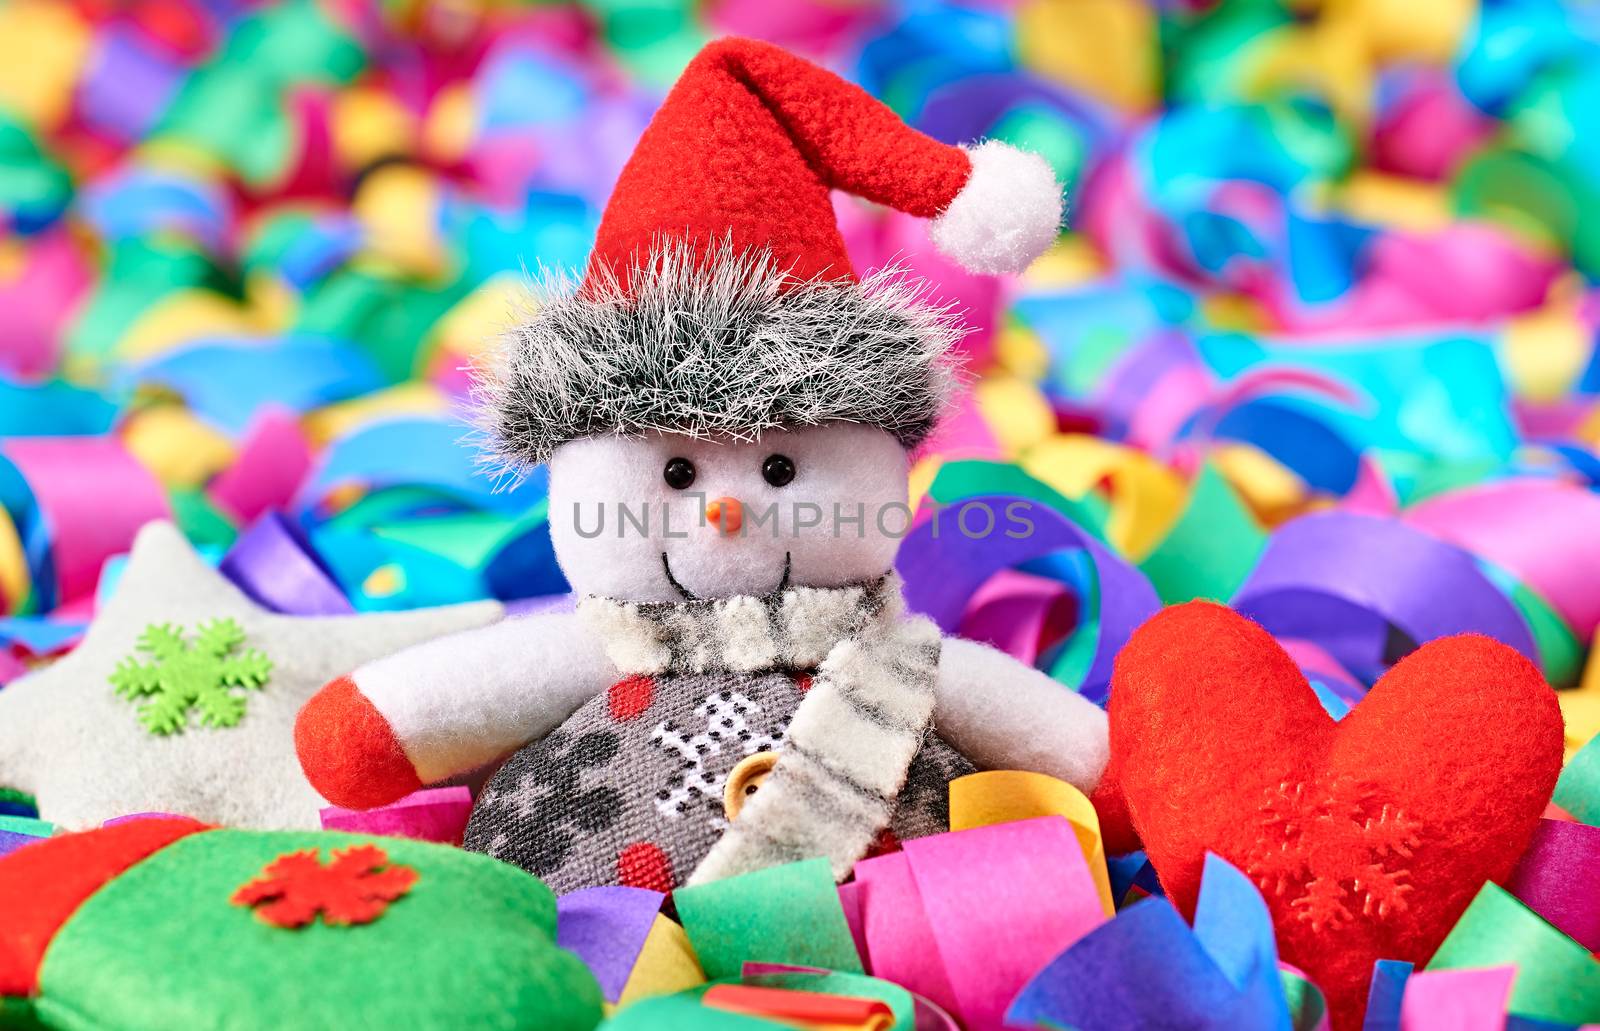 New Year 2016. Happy Snowman. Party decoration multicolored serpentine confetti. Cheerful fun winter holiday, copyspace.Snowman celebration in festive hat, scarf smiling, festive background